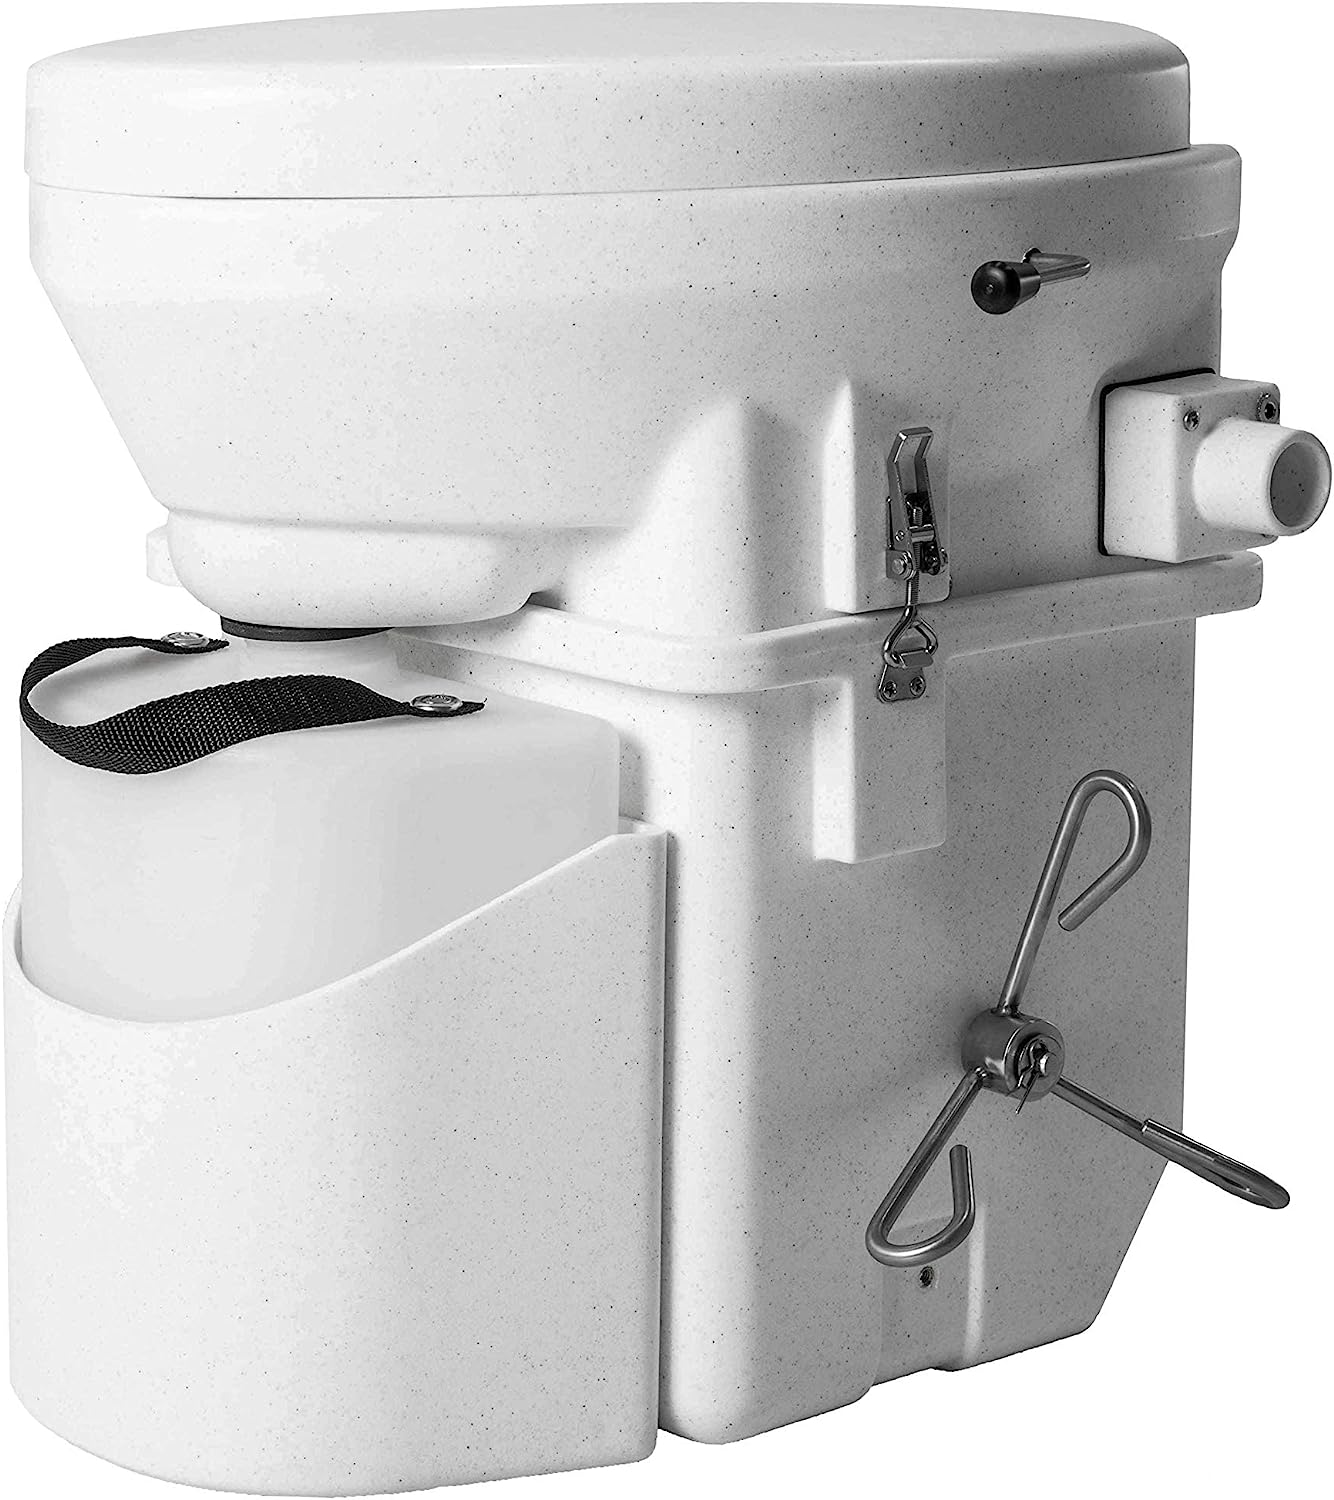 Nature's Head® Self Contained Composting Toilets